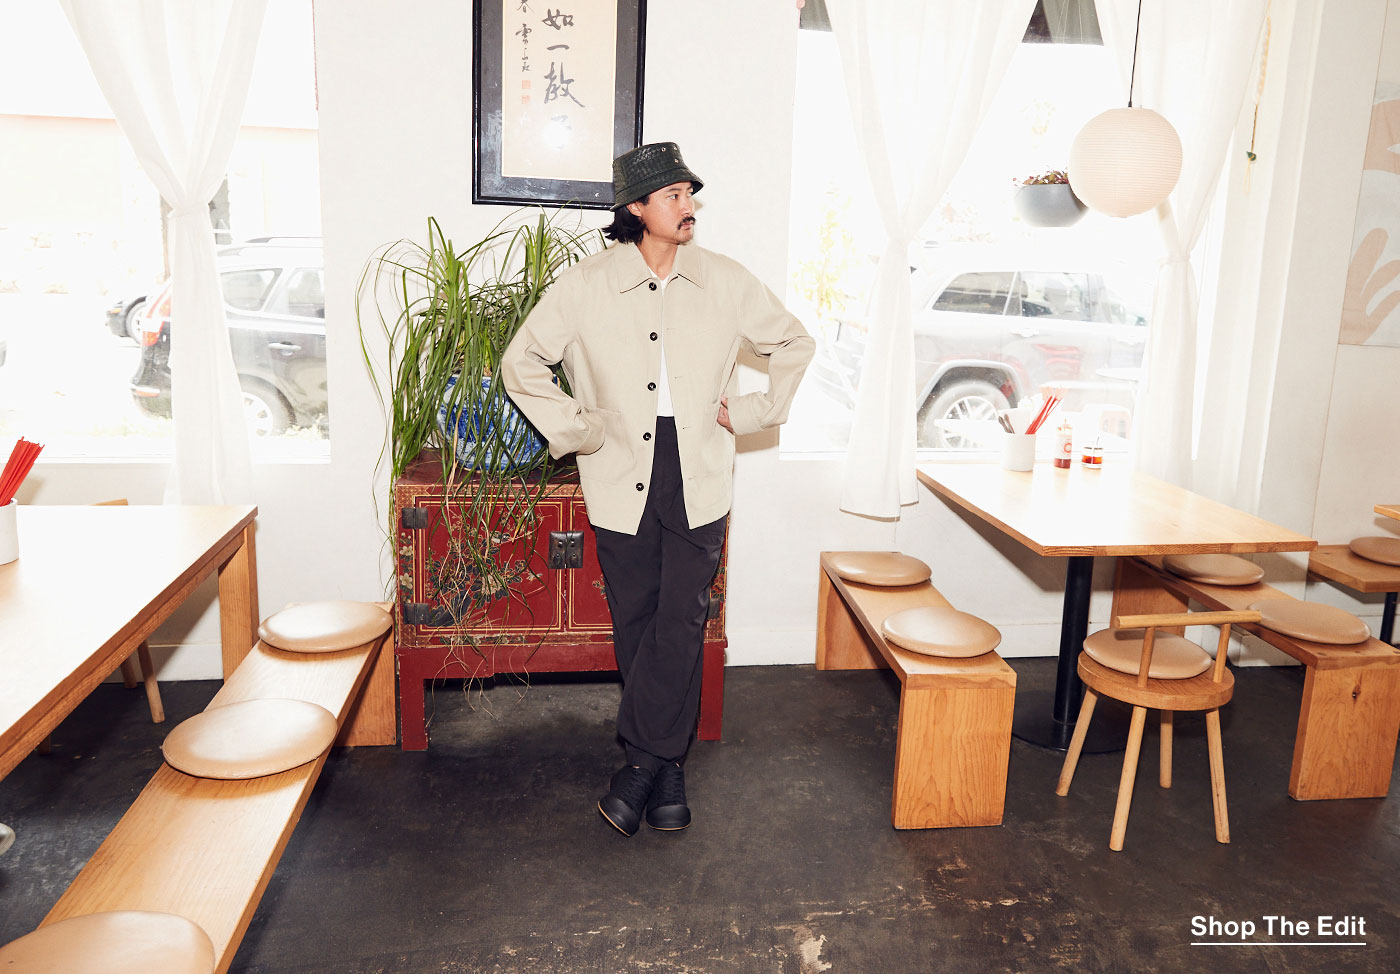 Keegan Fong standing in the dining area of his restaurant, Woon.